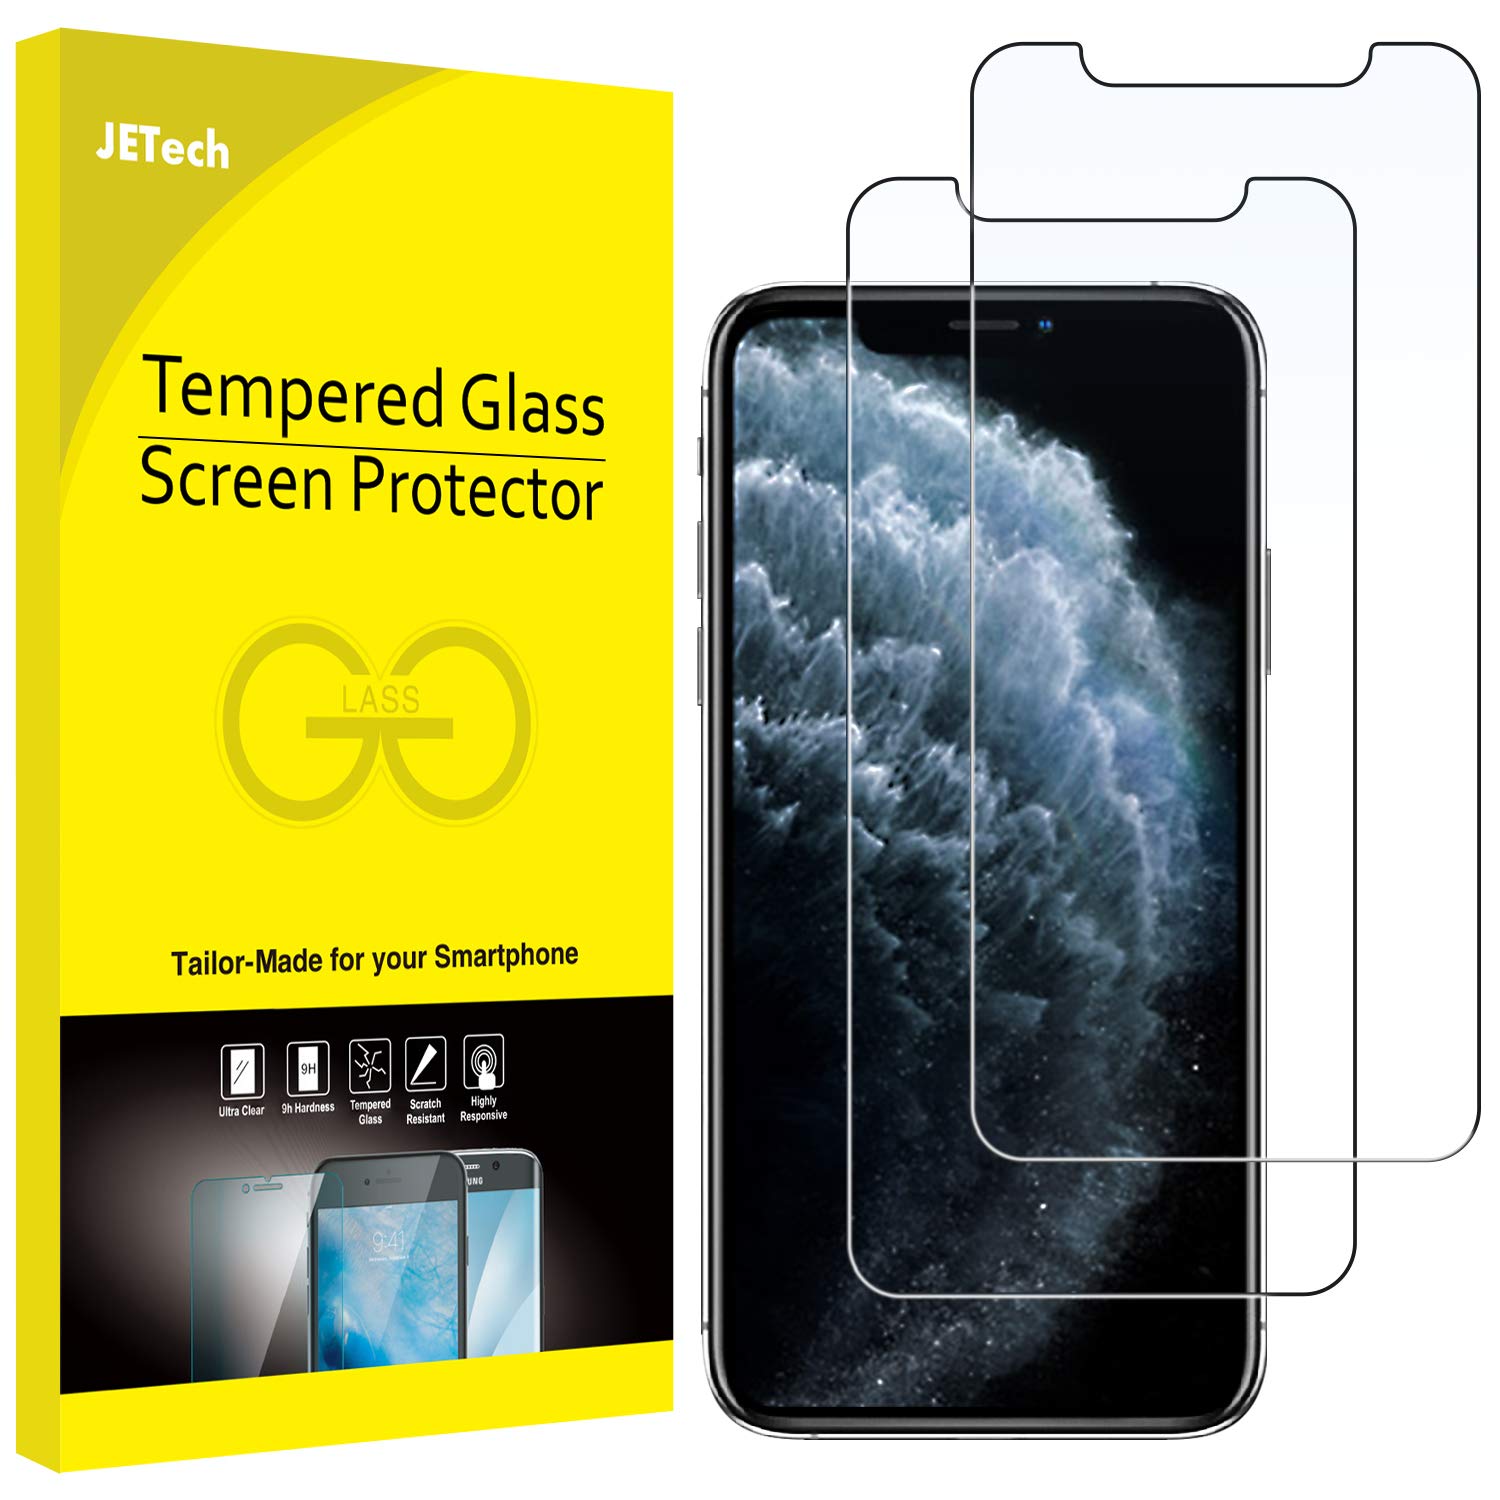 Book Cover JETech Screen Protector for iPhone 11 Pro, iPhone Xs and iPhone X 5.8-Inch, Tempered Glass Film, 2-Pack